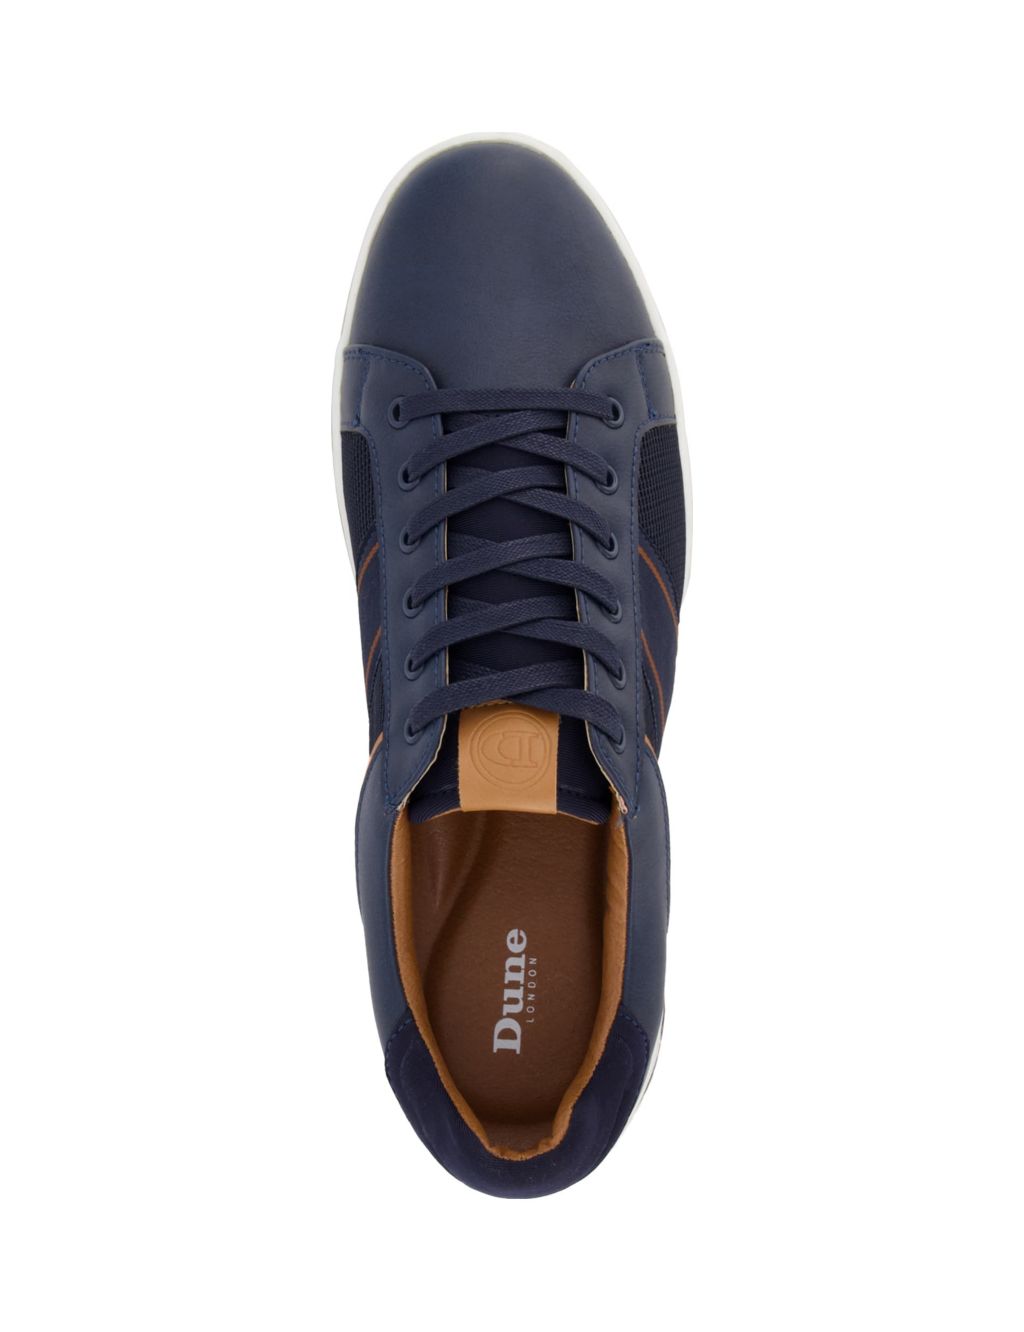 Stripe Lace up Trainers image 6